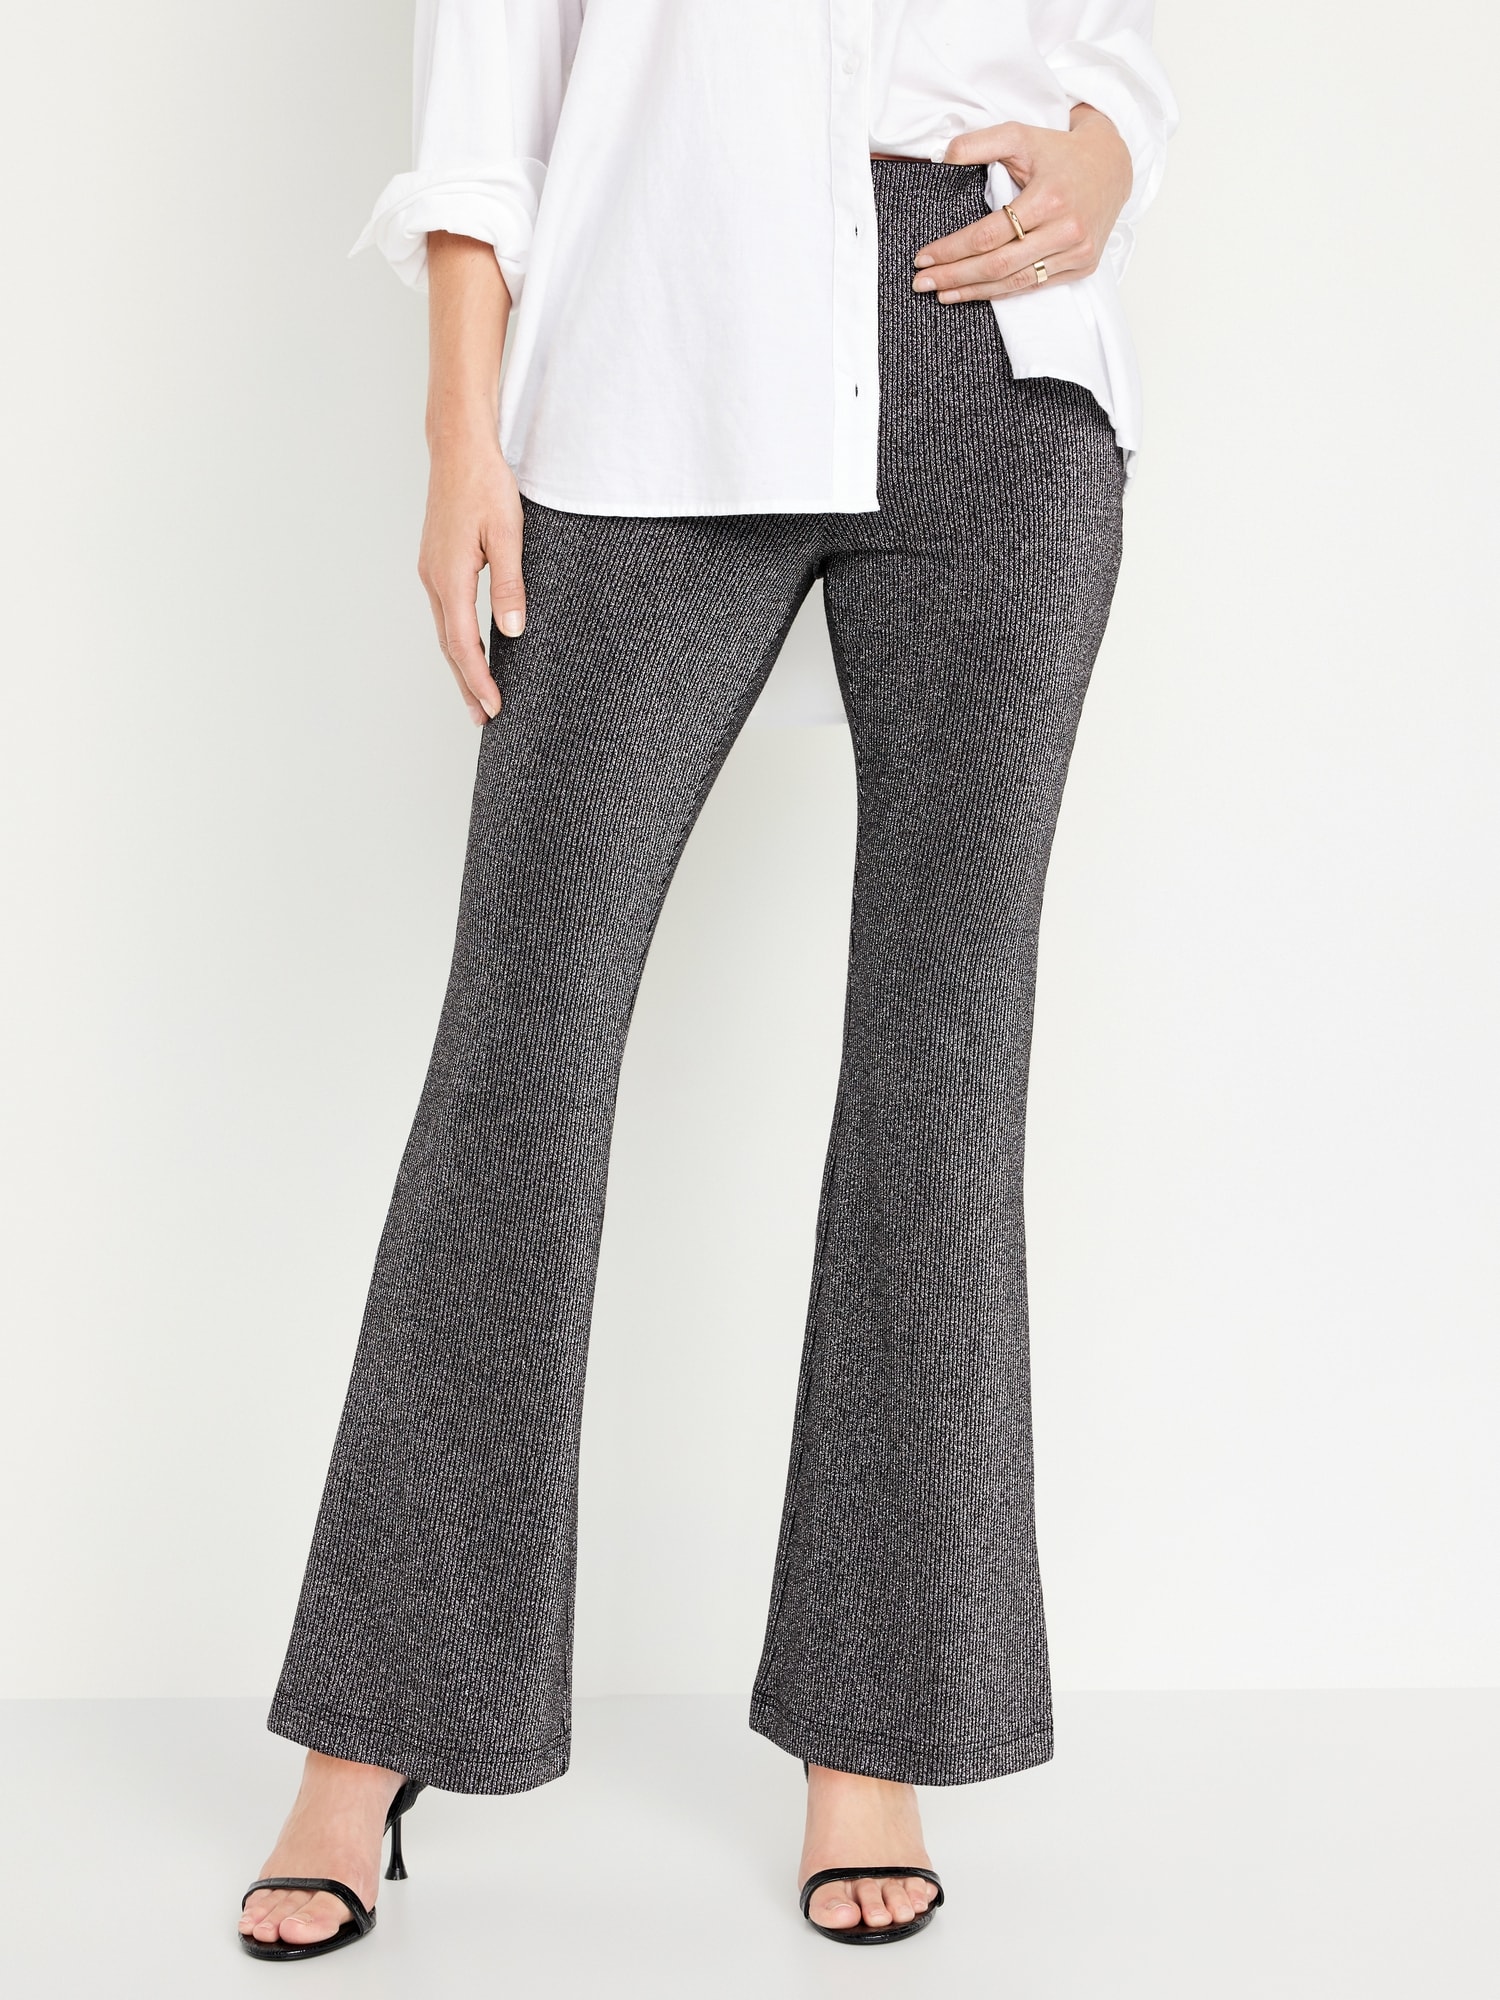 TOPSHOP Corduroy Ribbed Flare Trousers in Black